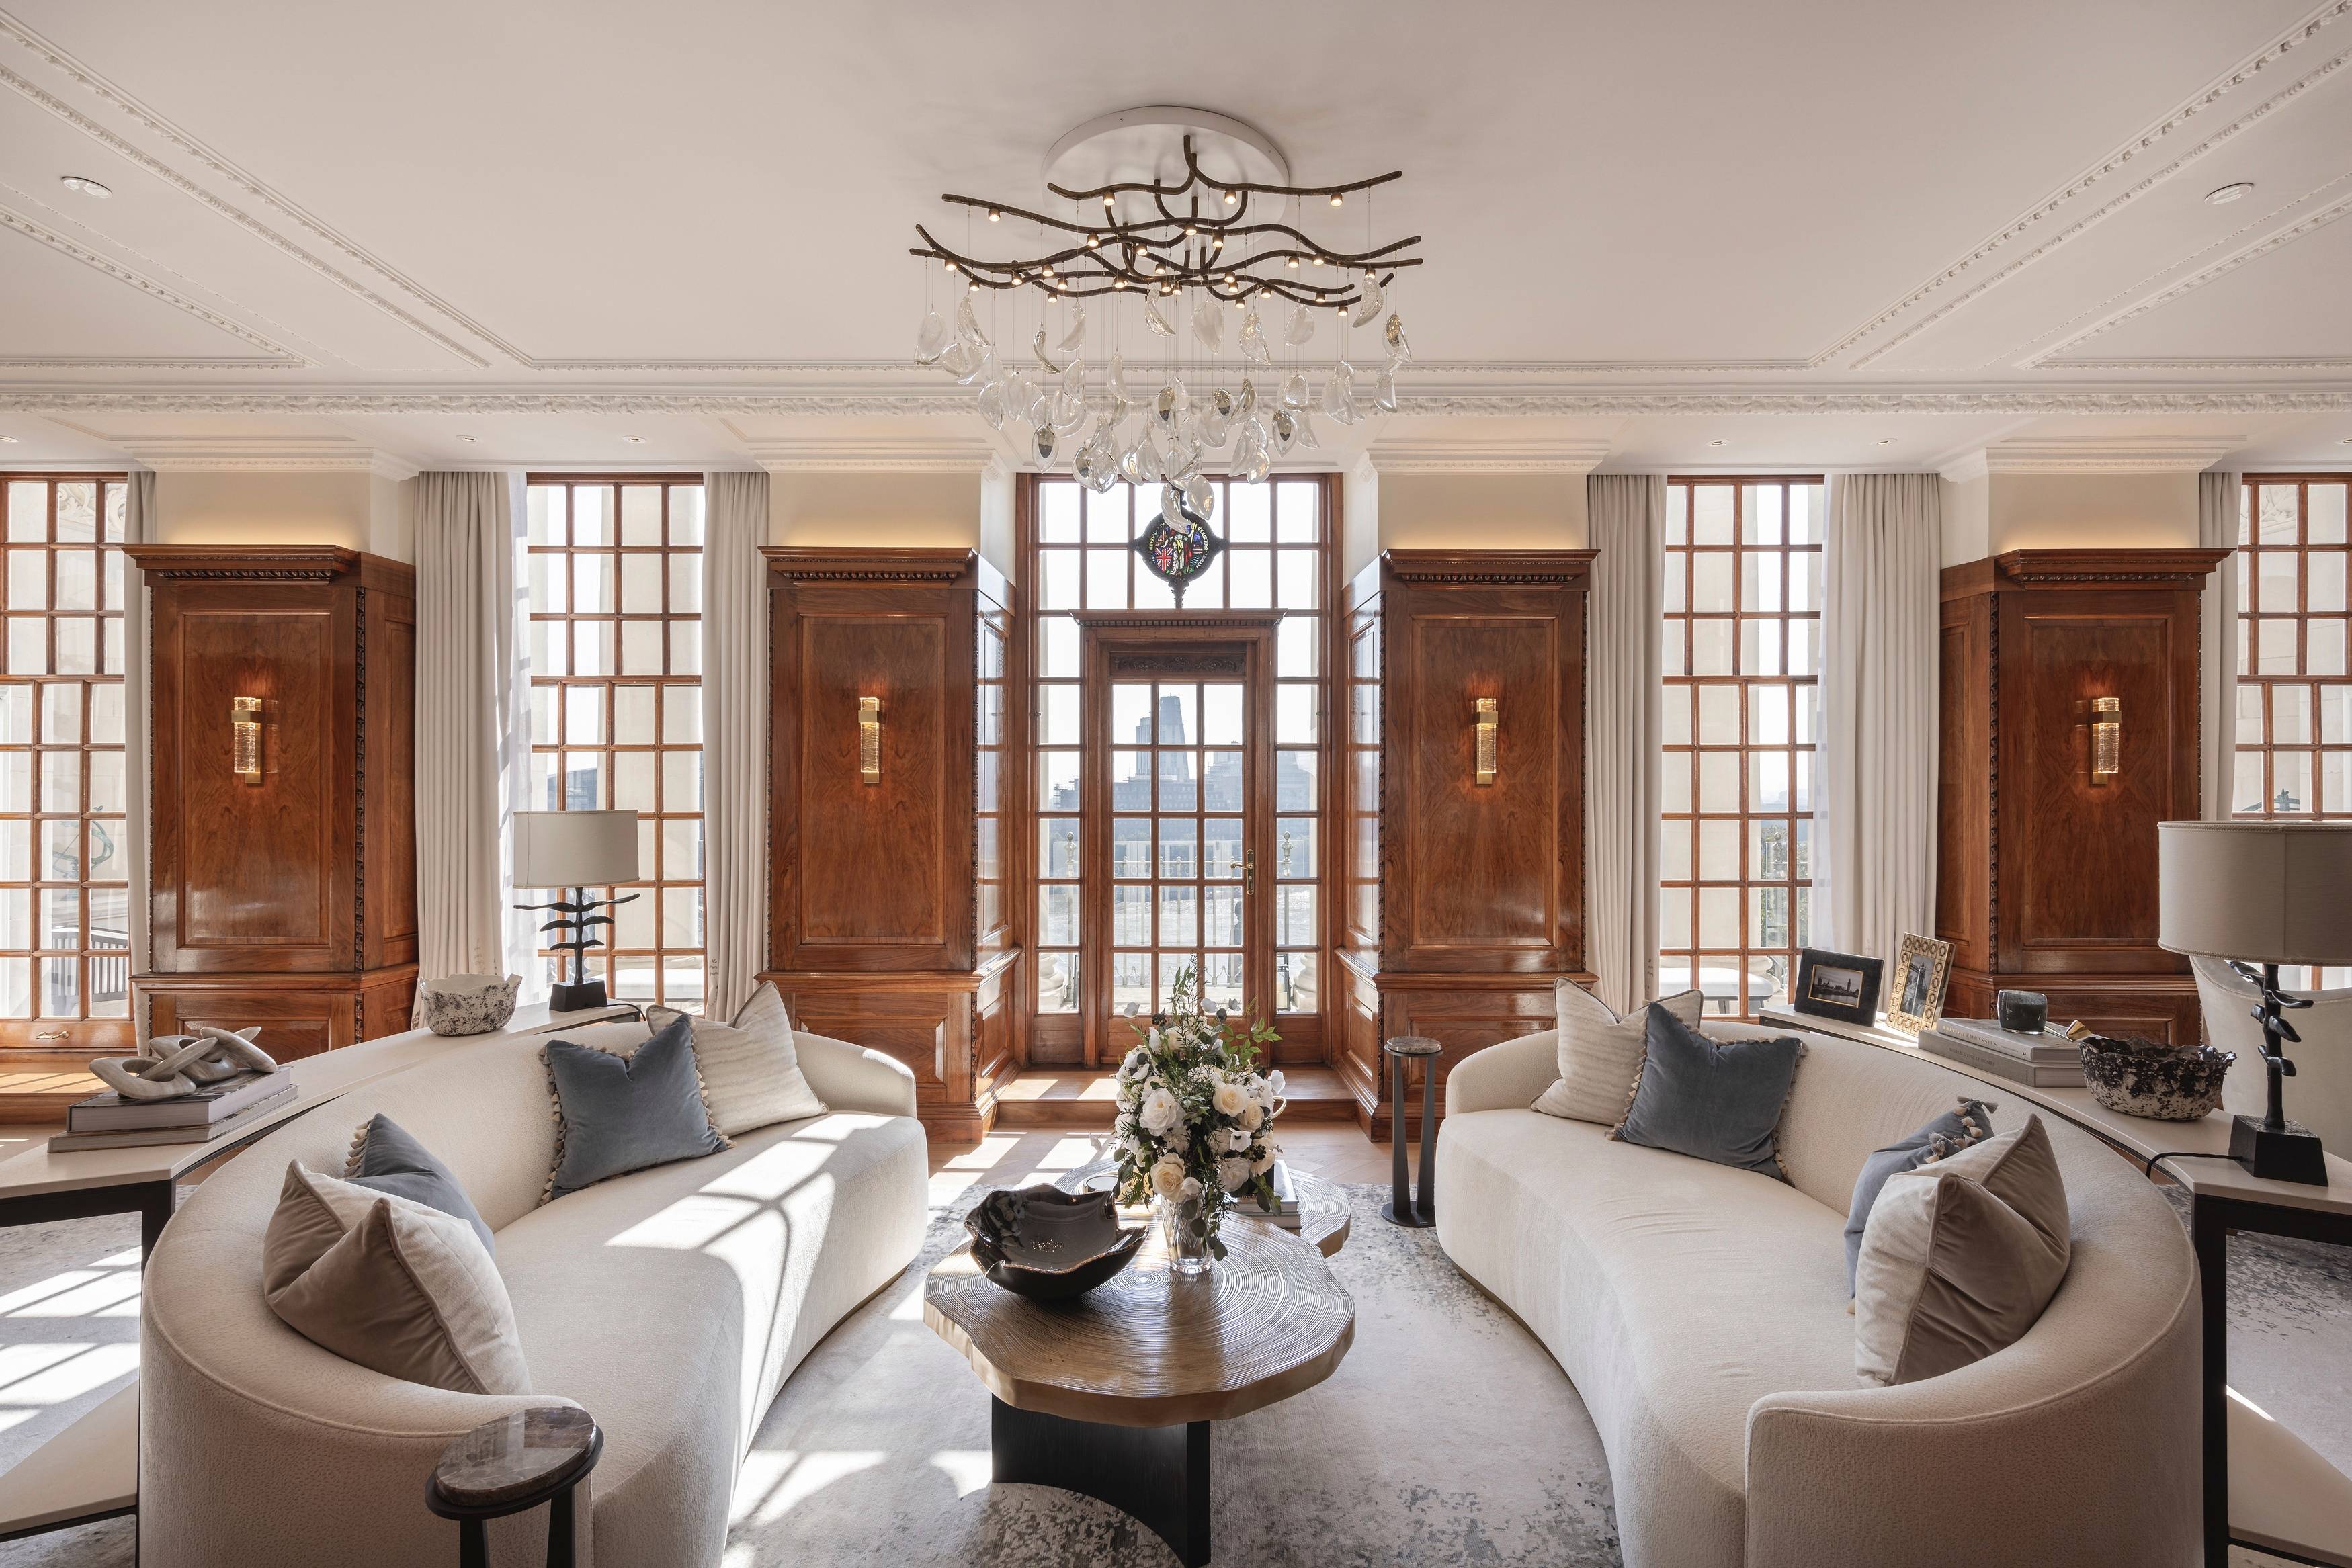 This elaborately proportioned residence features a private 43ft colonnade terrace with direct river and city views, an original 1920s stained glass window and one of the most extraordinary principal bedroom suites in London.